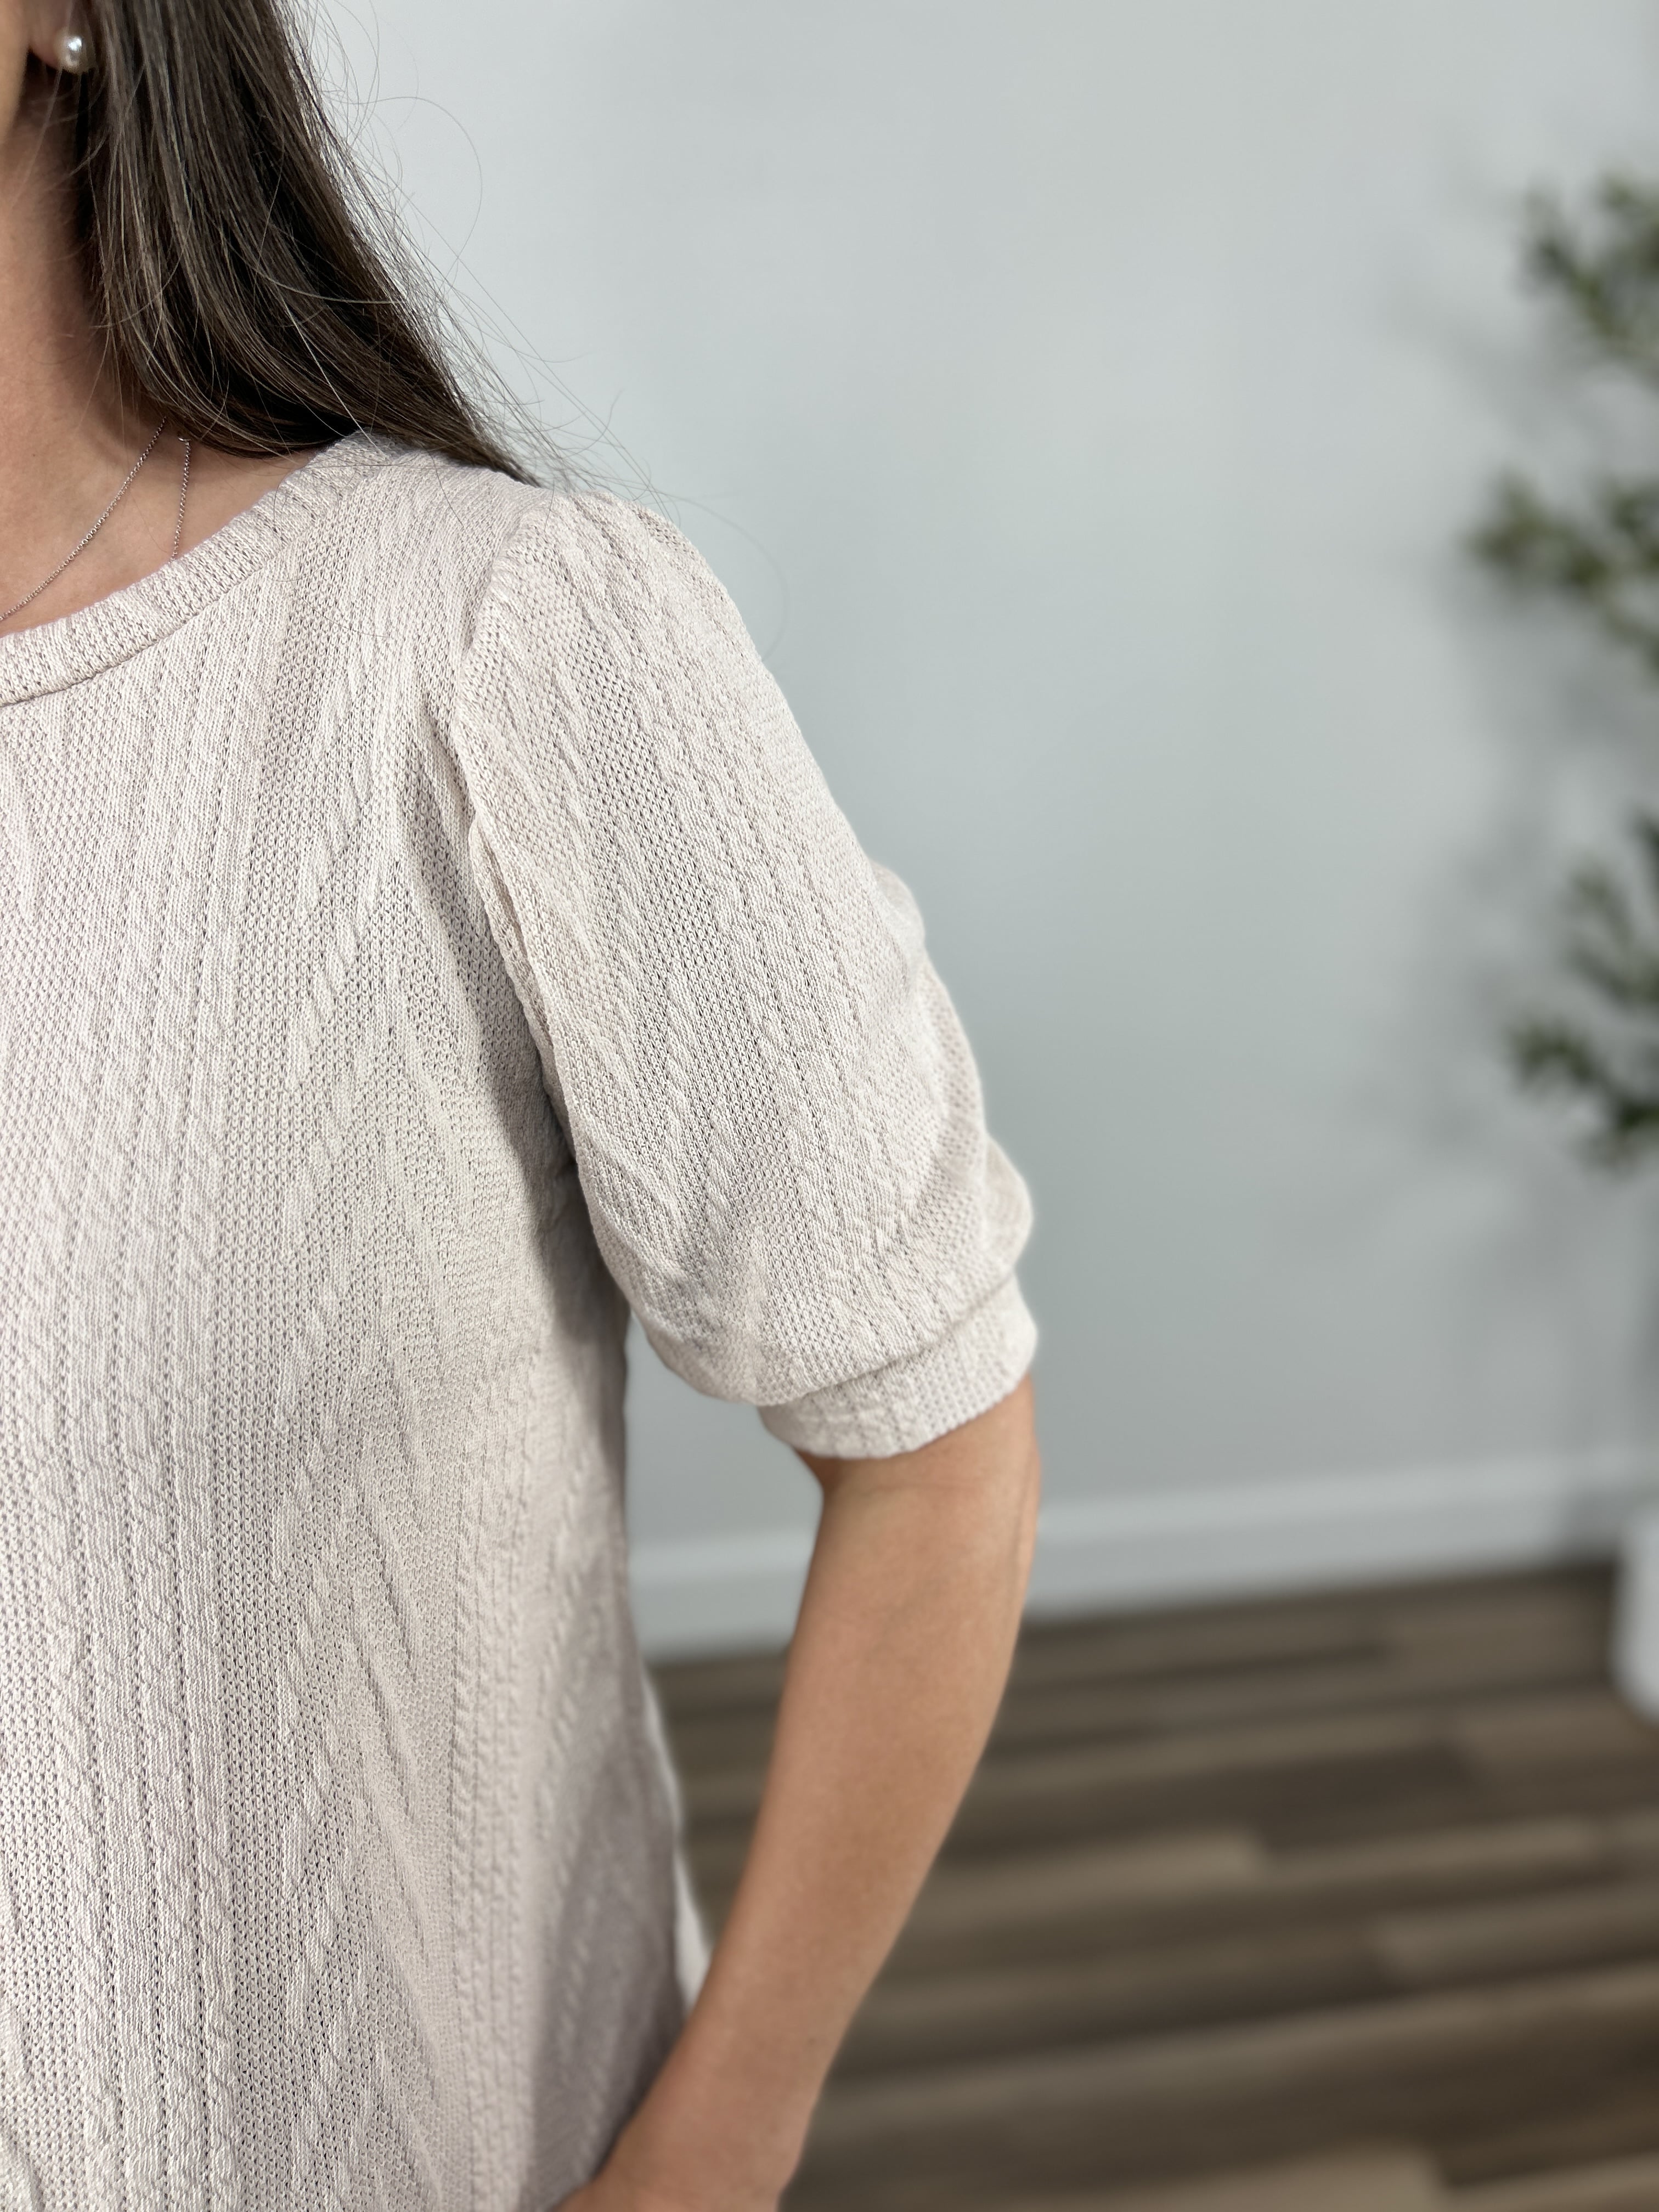 Upclose view of Lacy Cable Knit Top in oatmeal sleeve detailing.